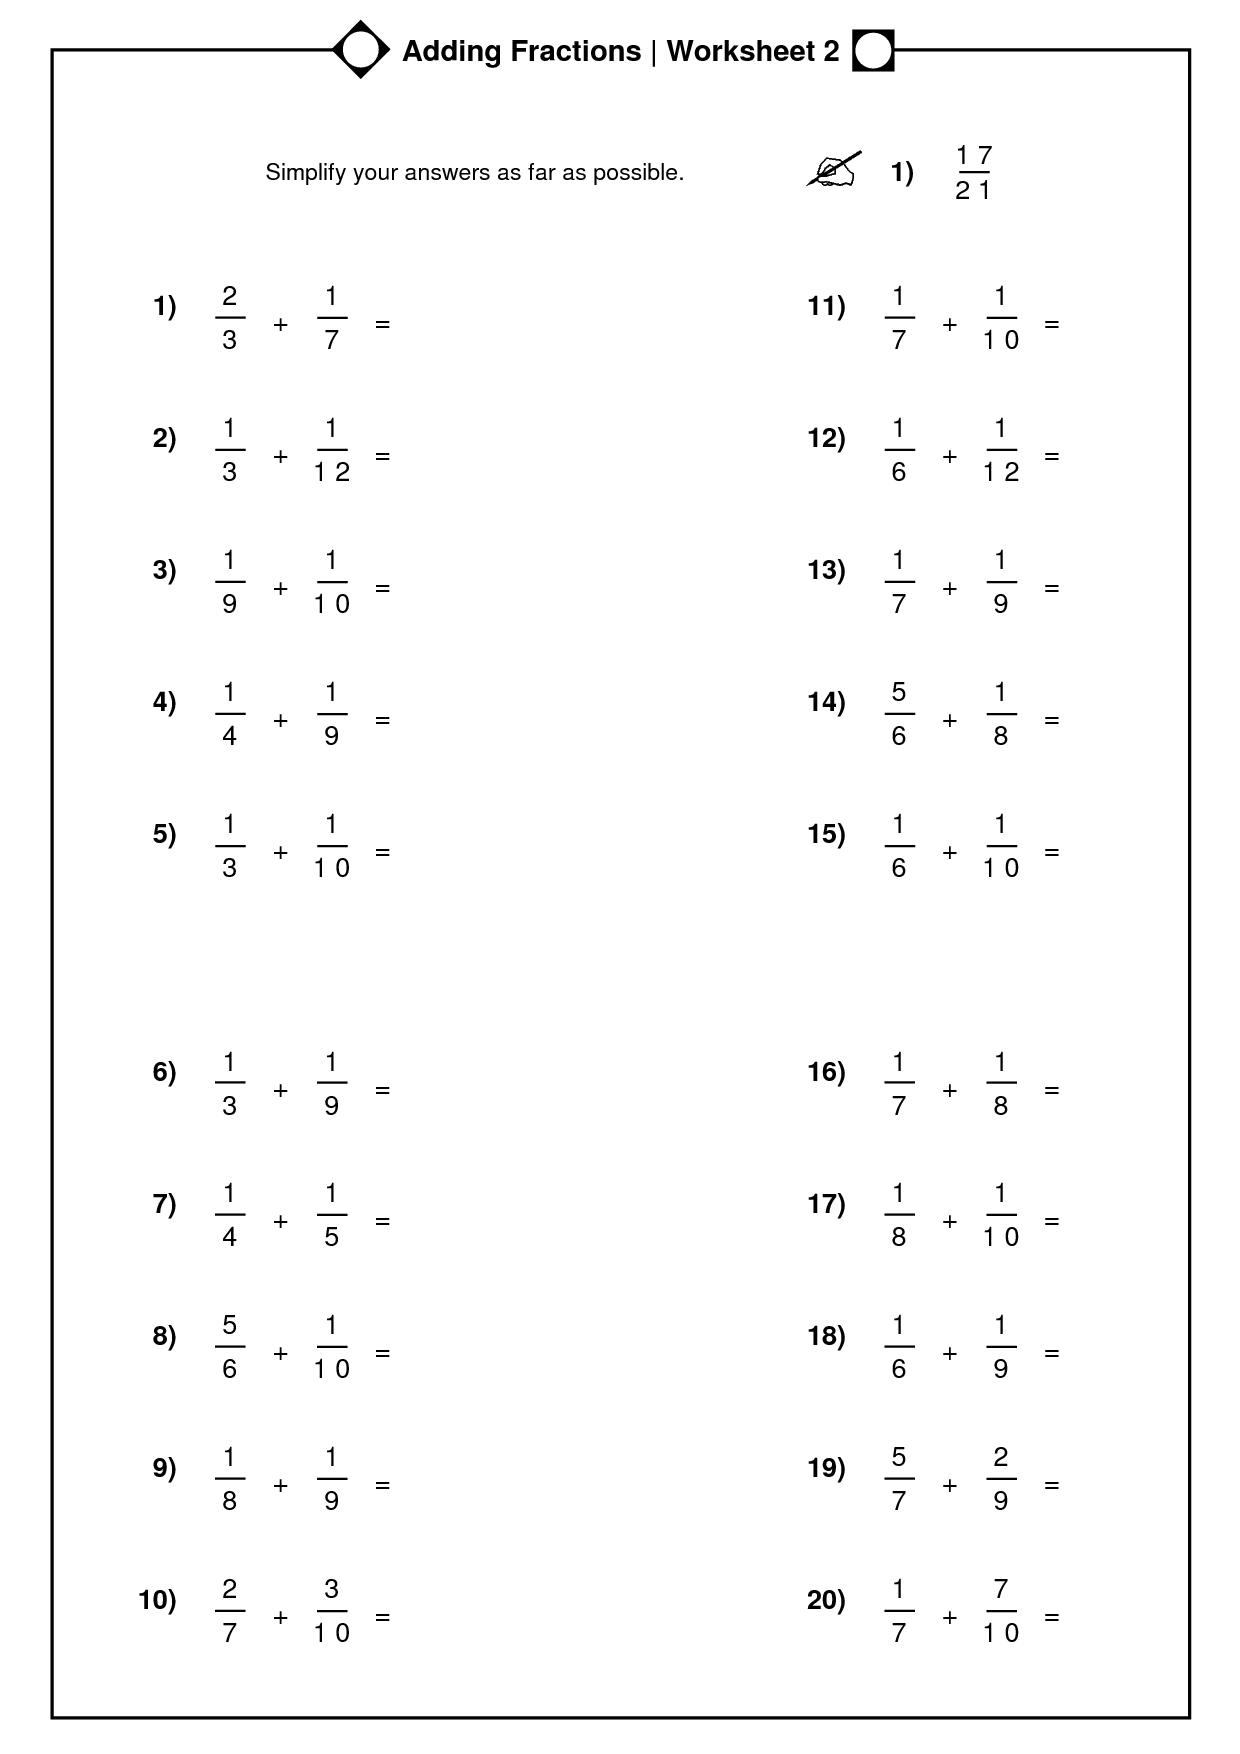 Homework Help Subtracting Fractions, Adding and Subtracting Within Adding Fractions Worksheet Pdf